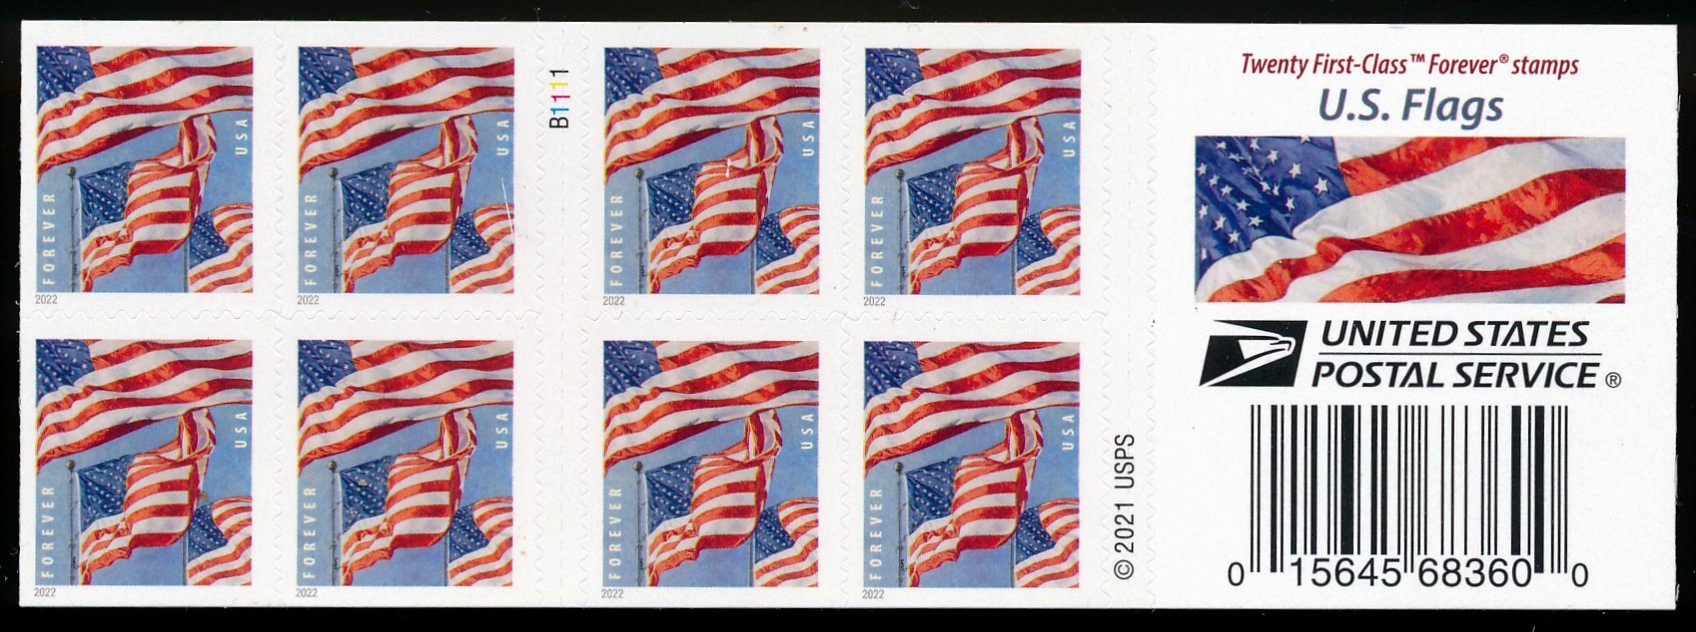 5658dsb Forever Flags Mint DS Booklet of 20 5658dsb